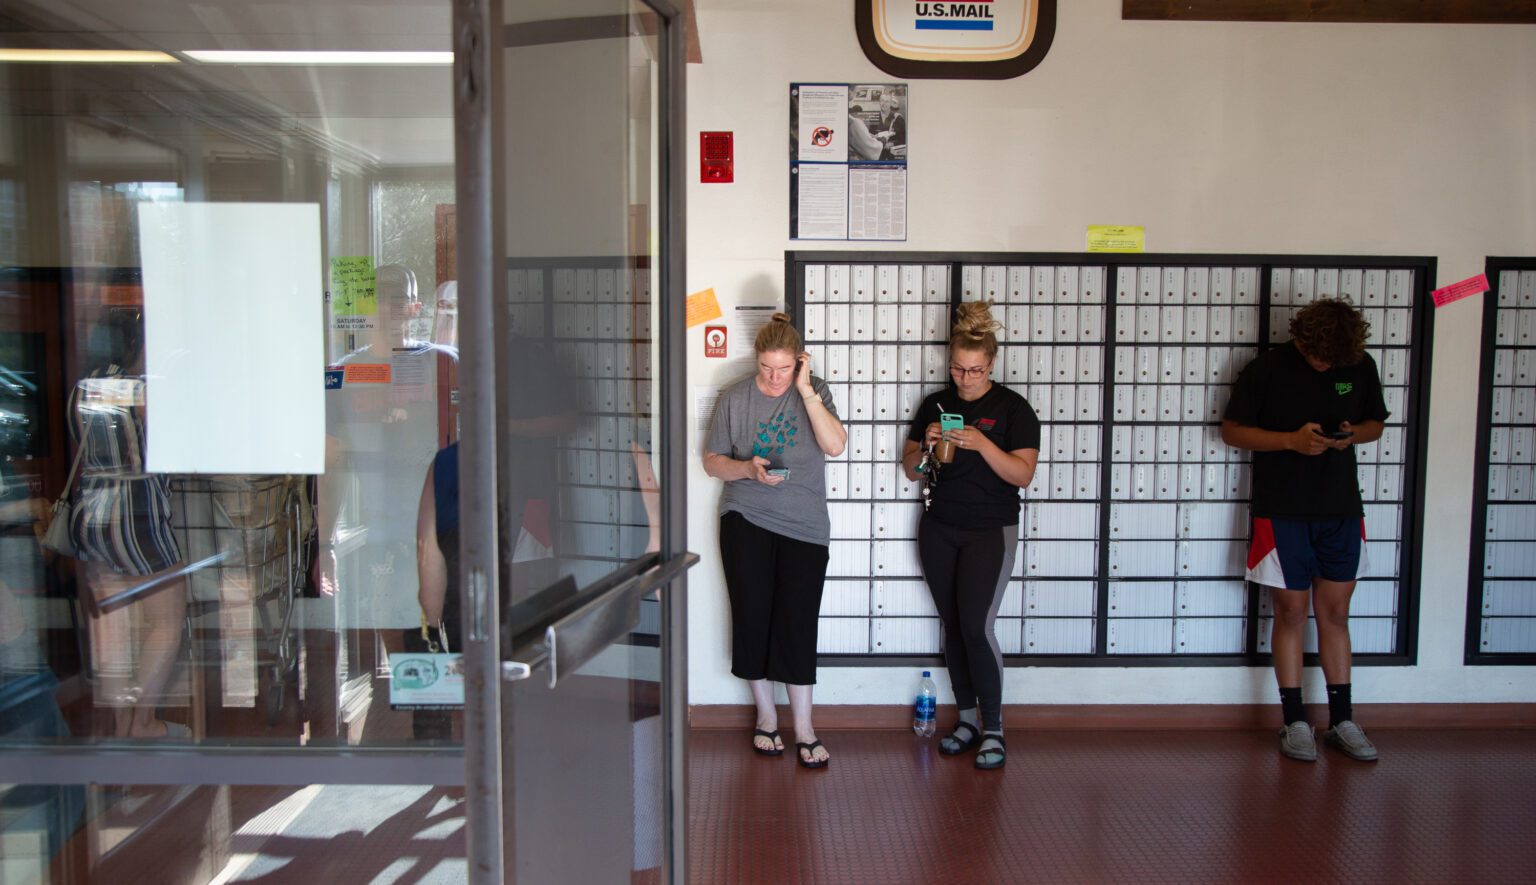 People wait in line to retrieve packages at the United States Postal Service in Ferndale on July 26.